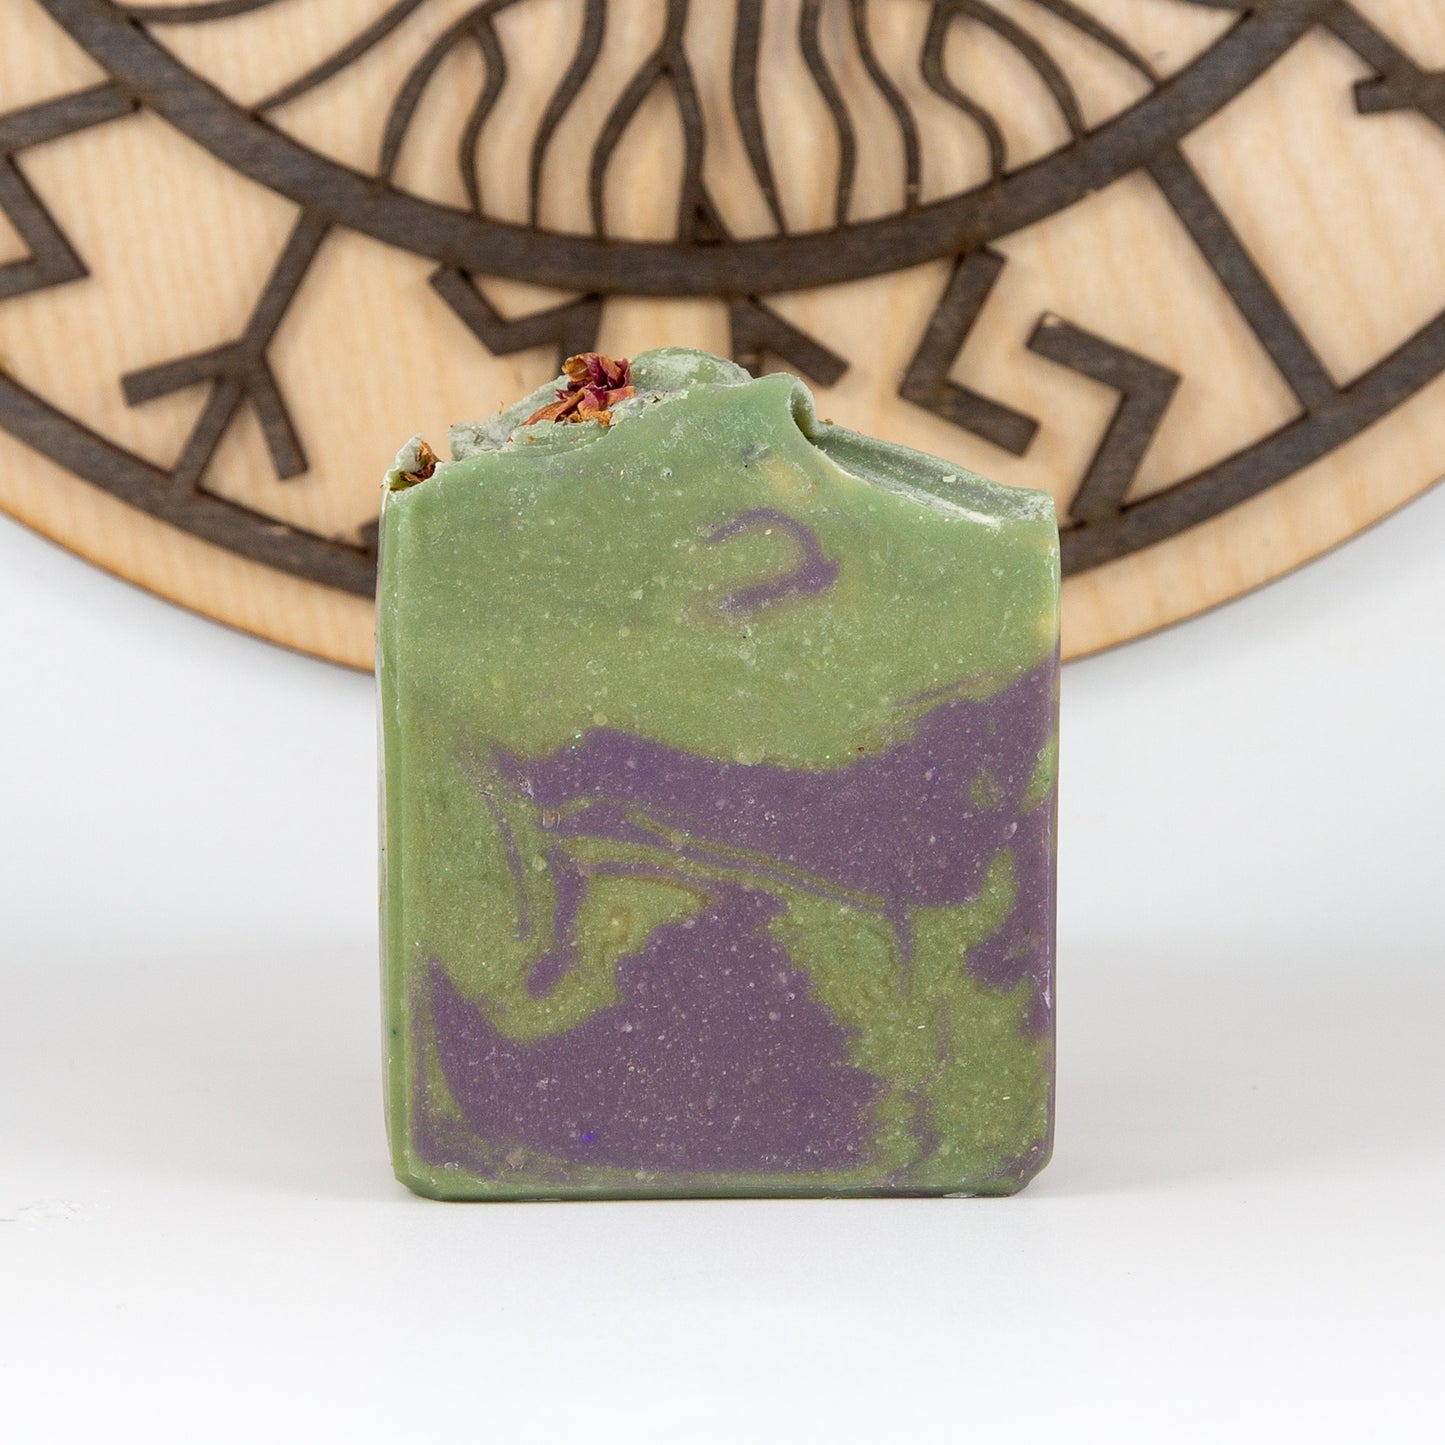 Calm Your Tits Breastmilk Soap in Lavender, Lemongrass and Spearmint, Birds of Valhalla, Breastmilk Soap, Birds of Valhalla